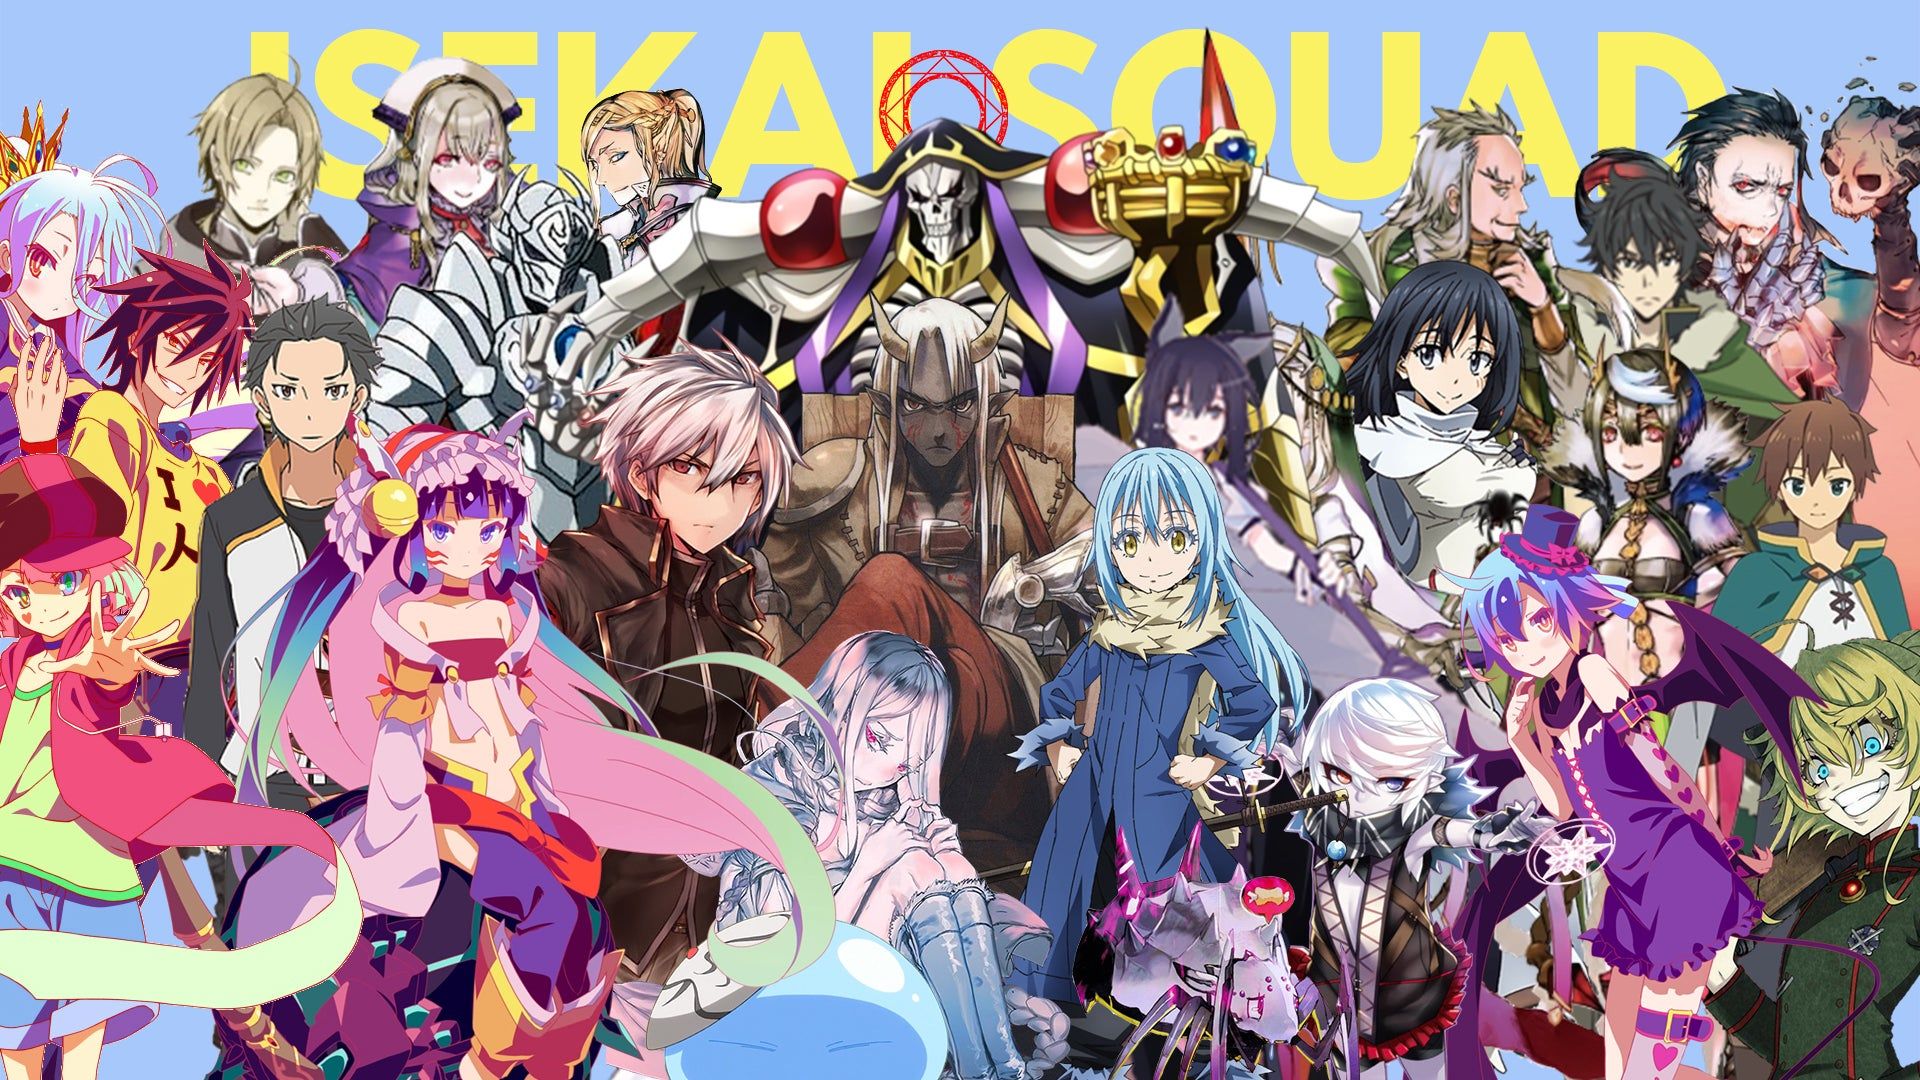 Just Made An Isekai Protagonists(mostly) Wallpaper, Who Should I Put In Next? (X Post: Credit Goes To U The Zenn)